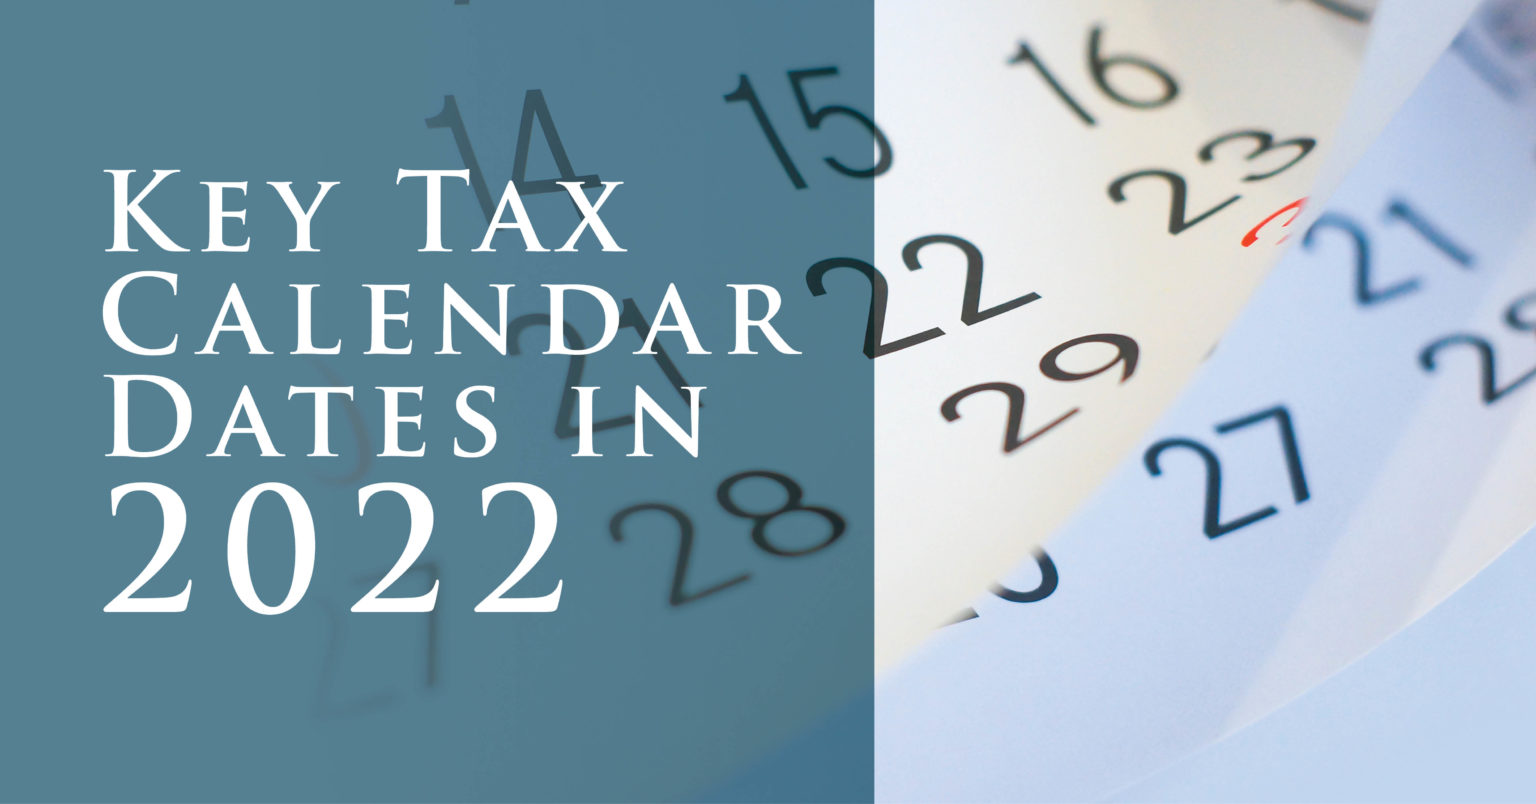 Key Tax Calendar Dates in 2022 Finance Tips Business Accounting Blog